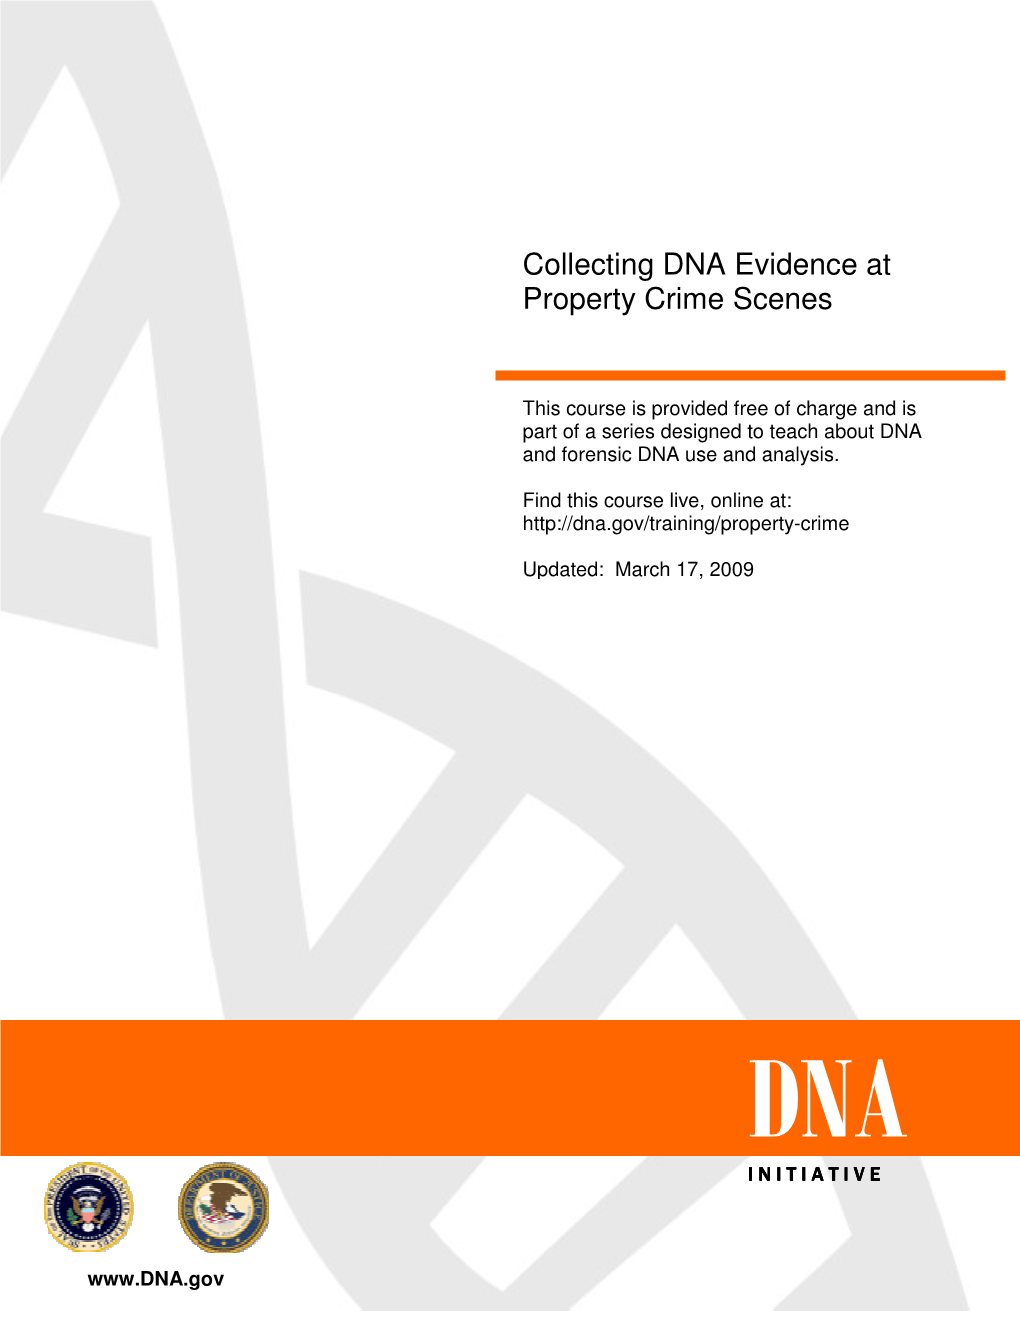 Collecting DNA Evidence at Property Crime Scenes